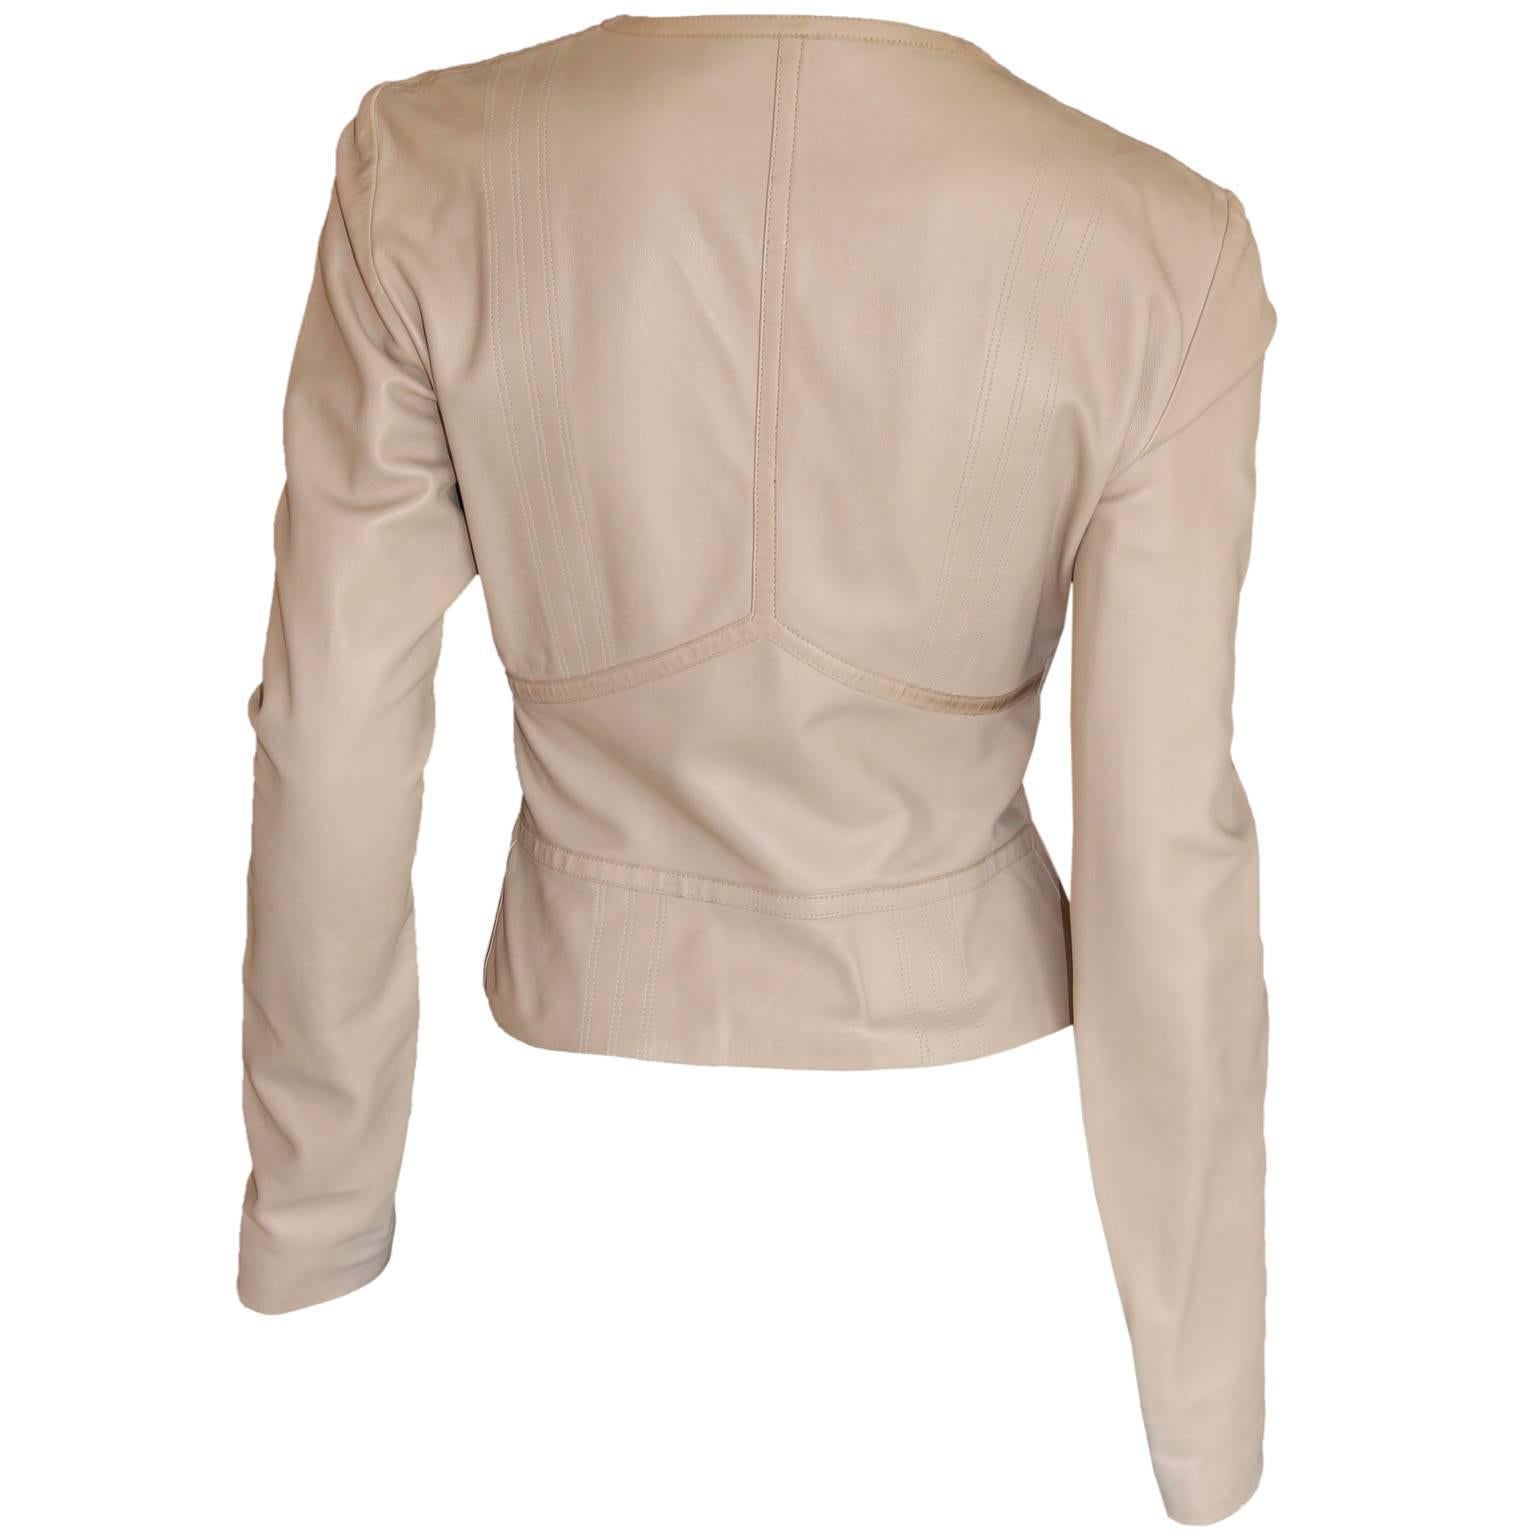 That Ridiculously Rare & Iconic Tom Ford for Gucci Fall/Winter 2001 nude lambskin leather jacket! This heavenly jacket is an Italian size 44 & will fit a US size 6 to 8 beautifully... an absolute must for any Tom Ford lover or